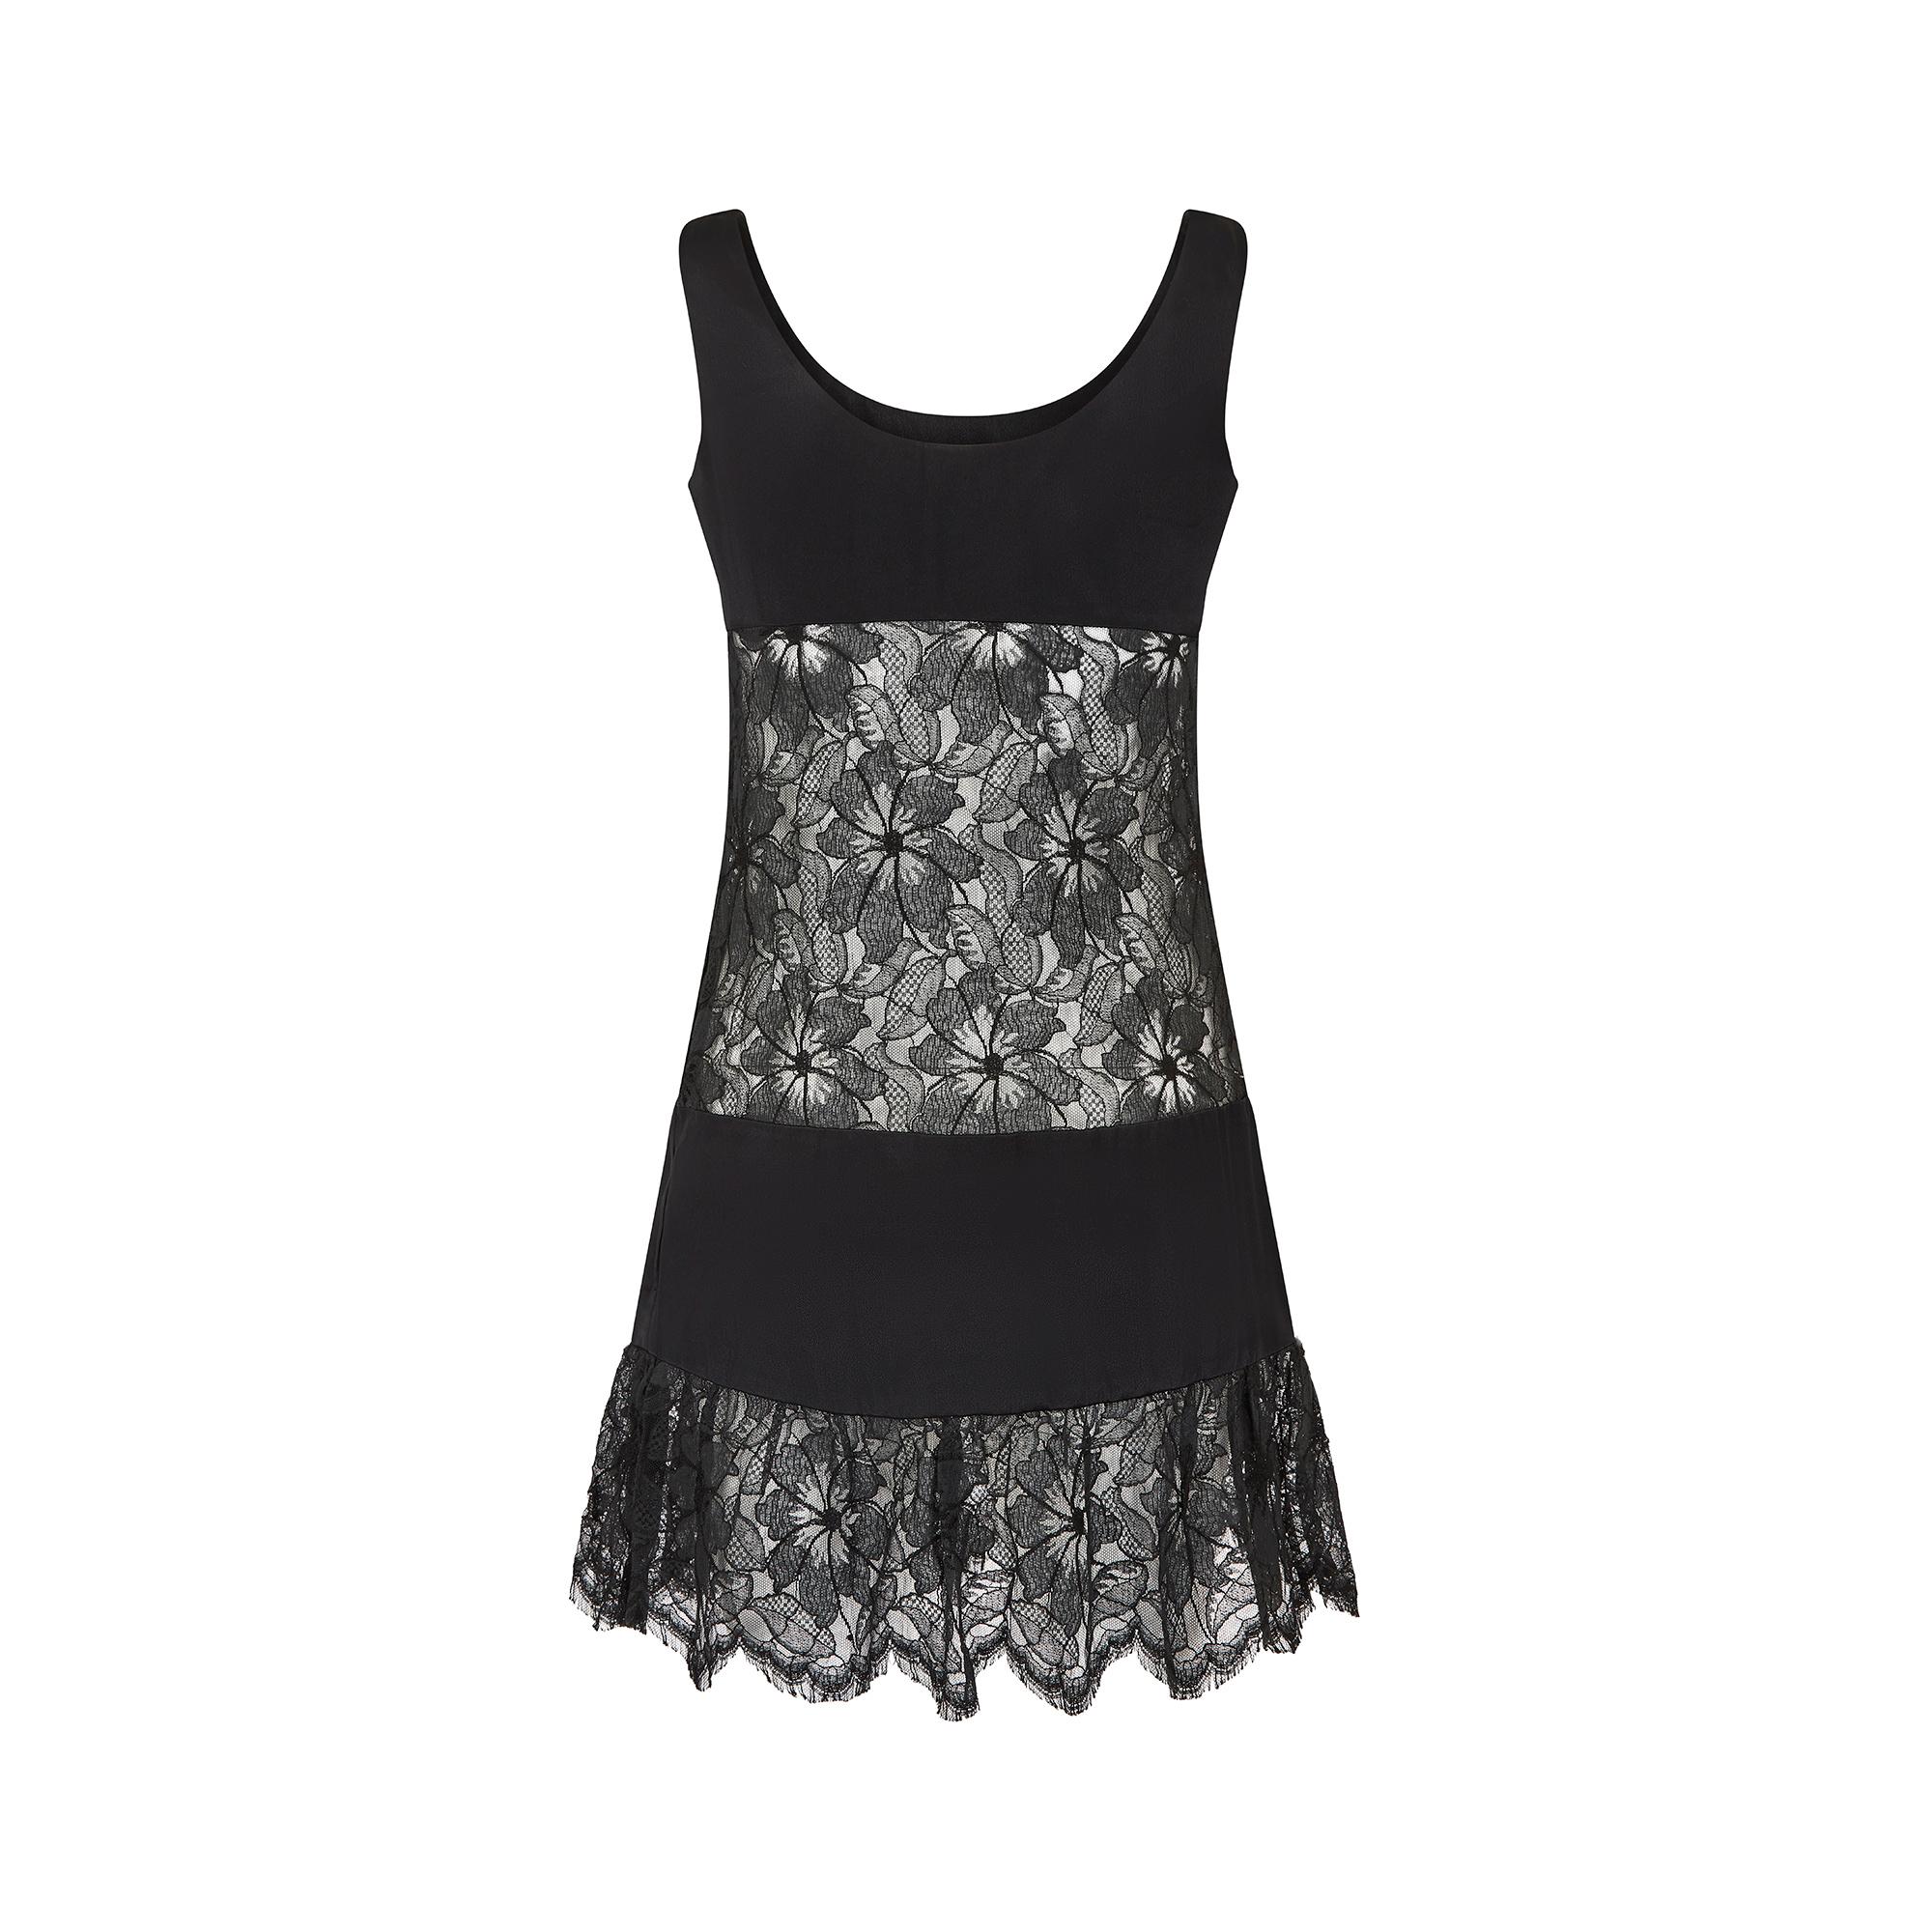 1960s Gerald McCann Black Satin and Floral Lace Cutout Dress In Excellent Condition For Sale In London, GB